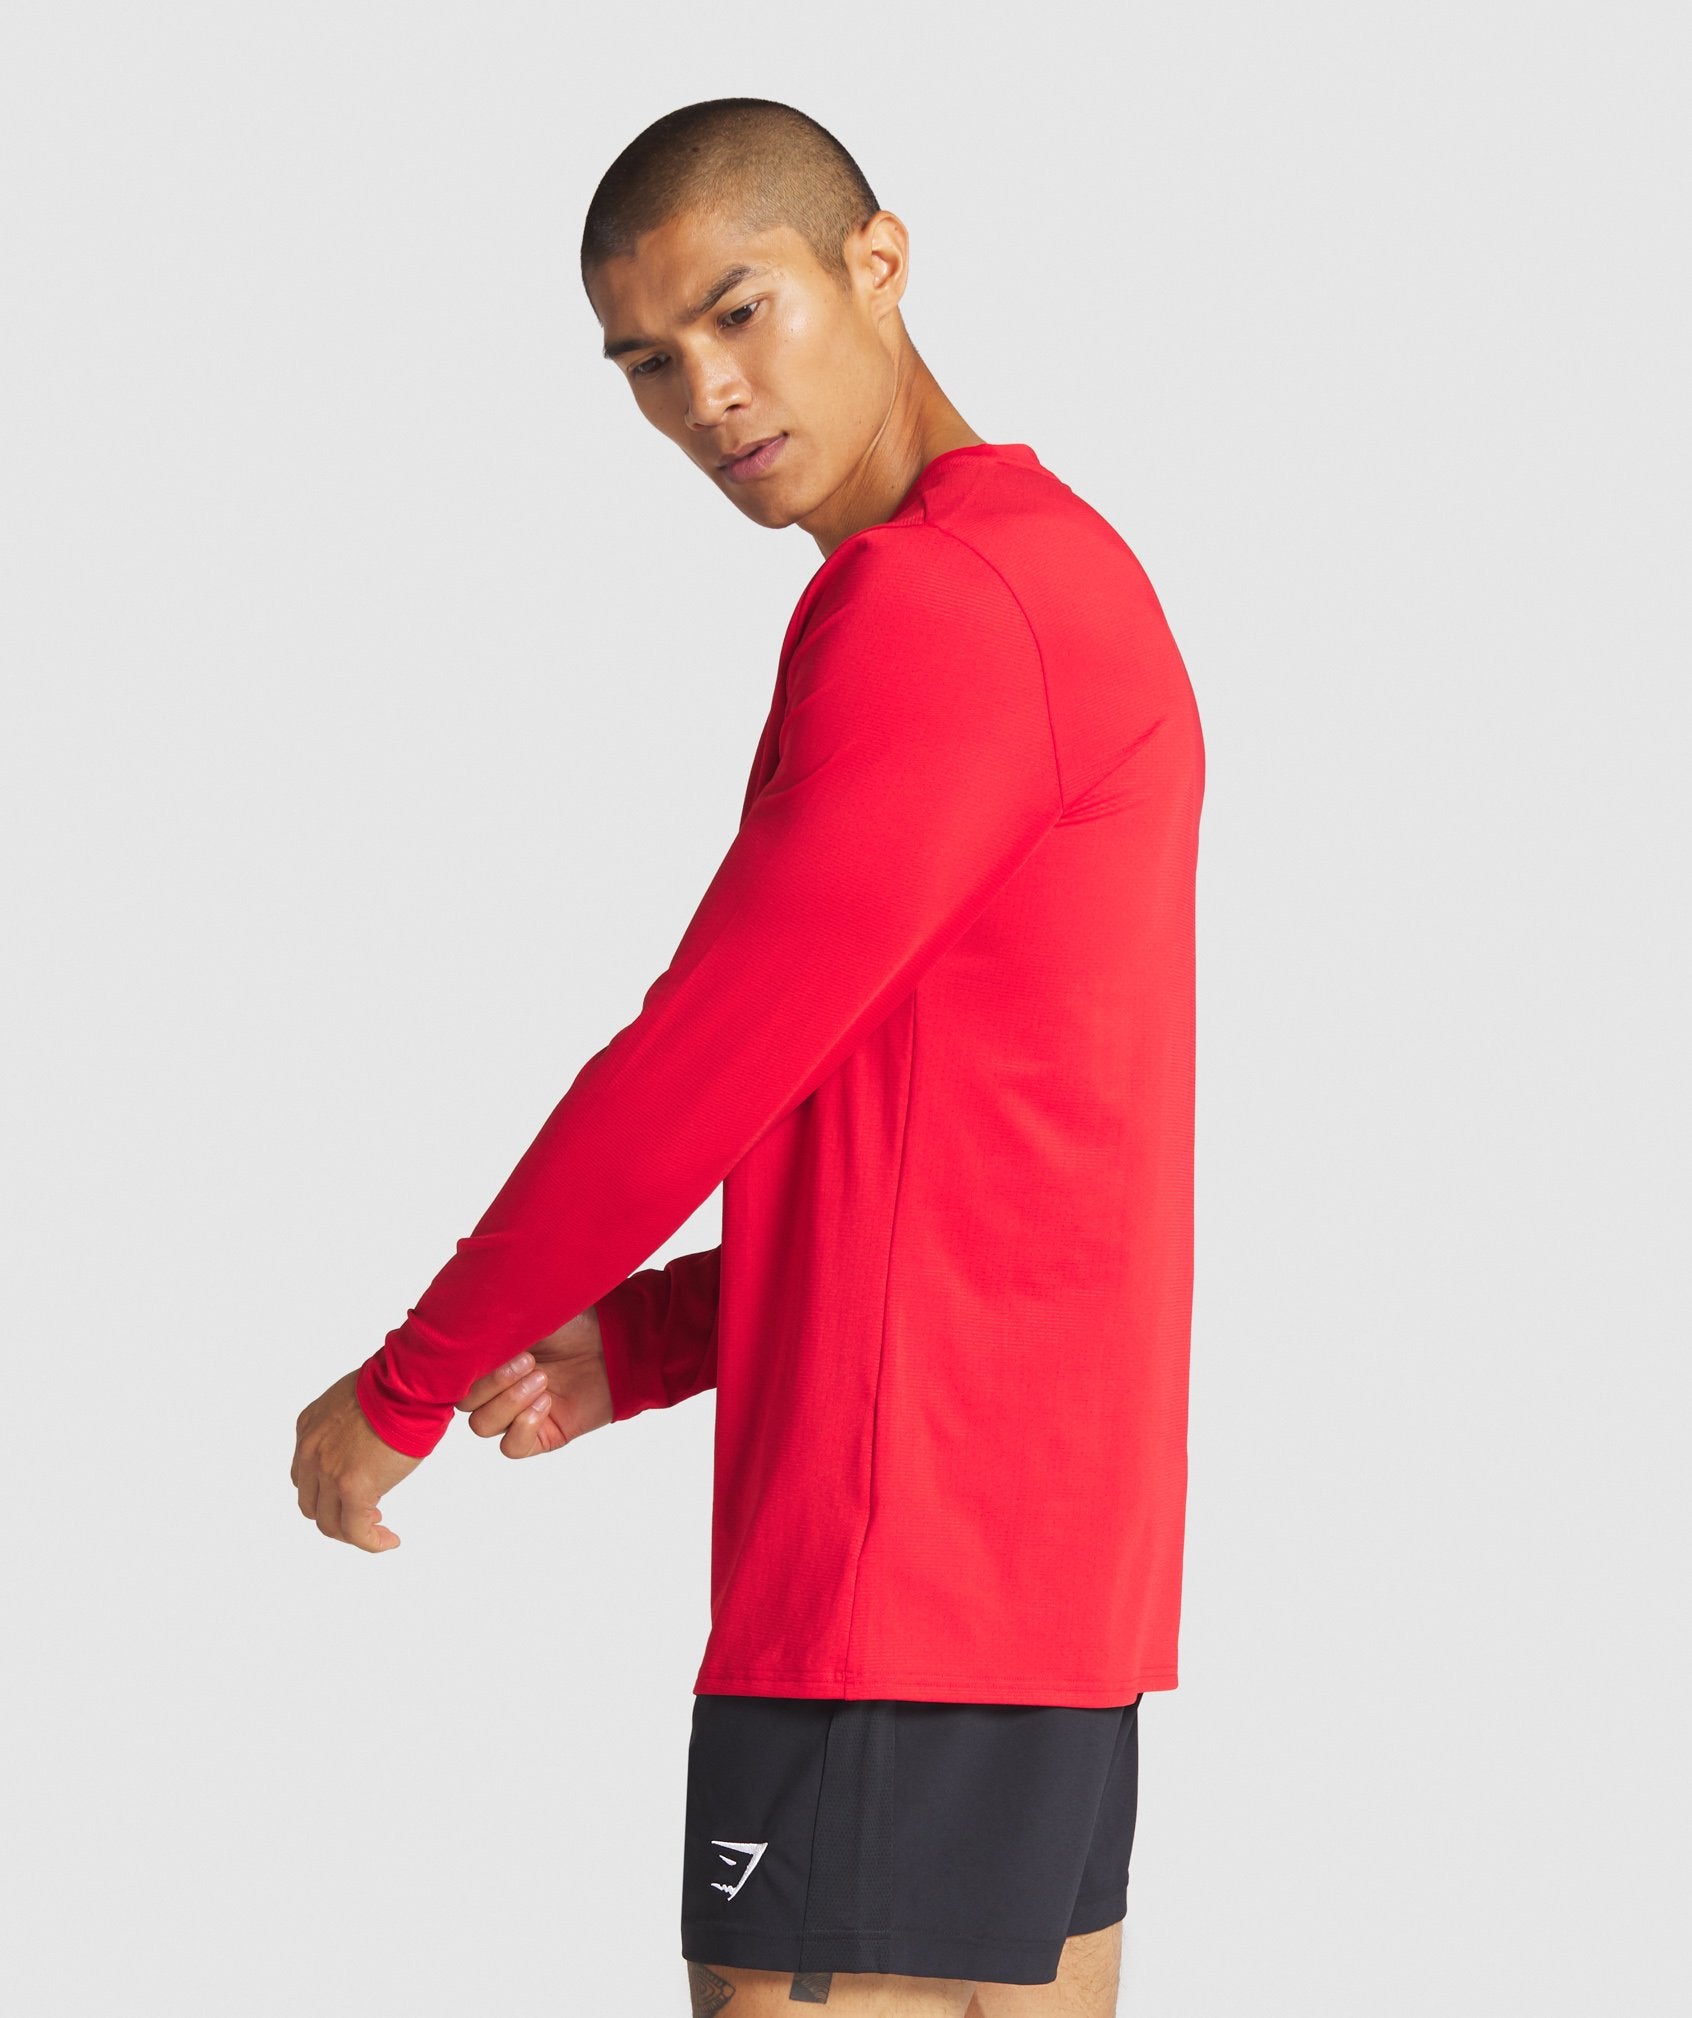 Arrival Long Sleeve T-Shirt in Red